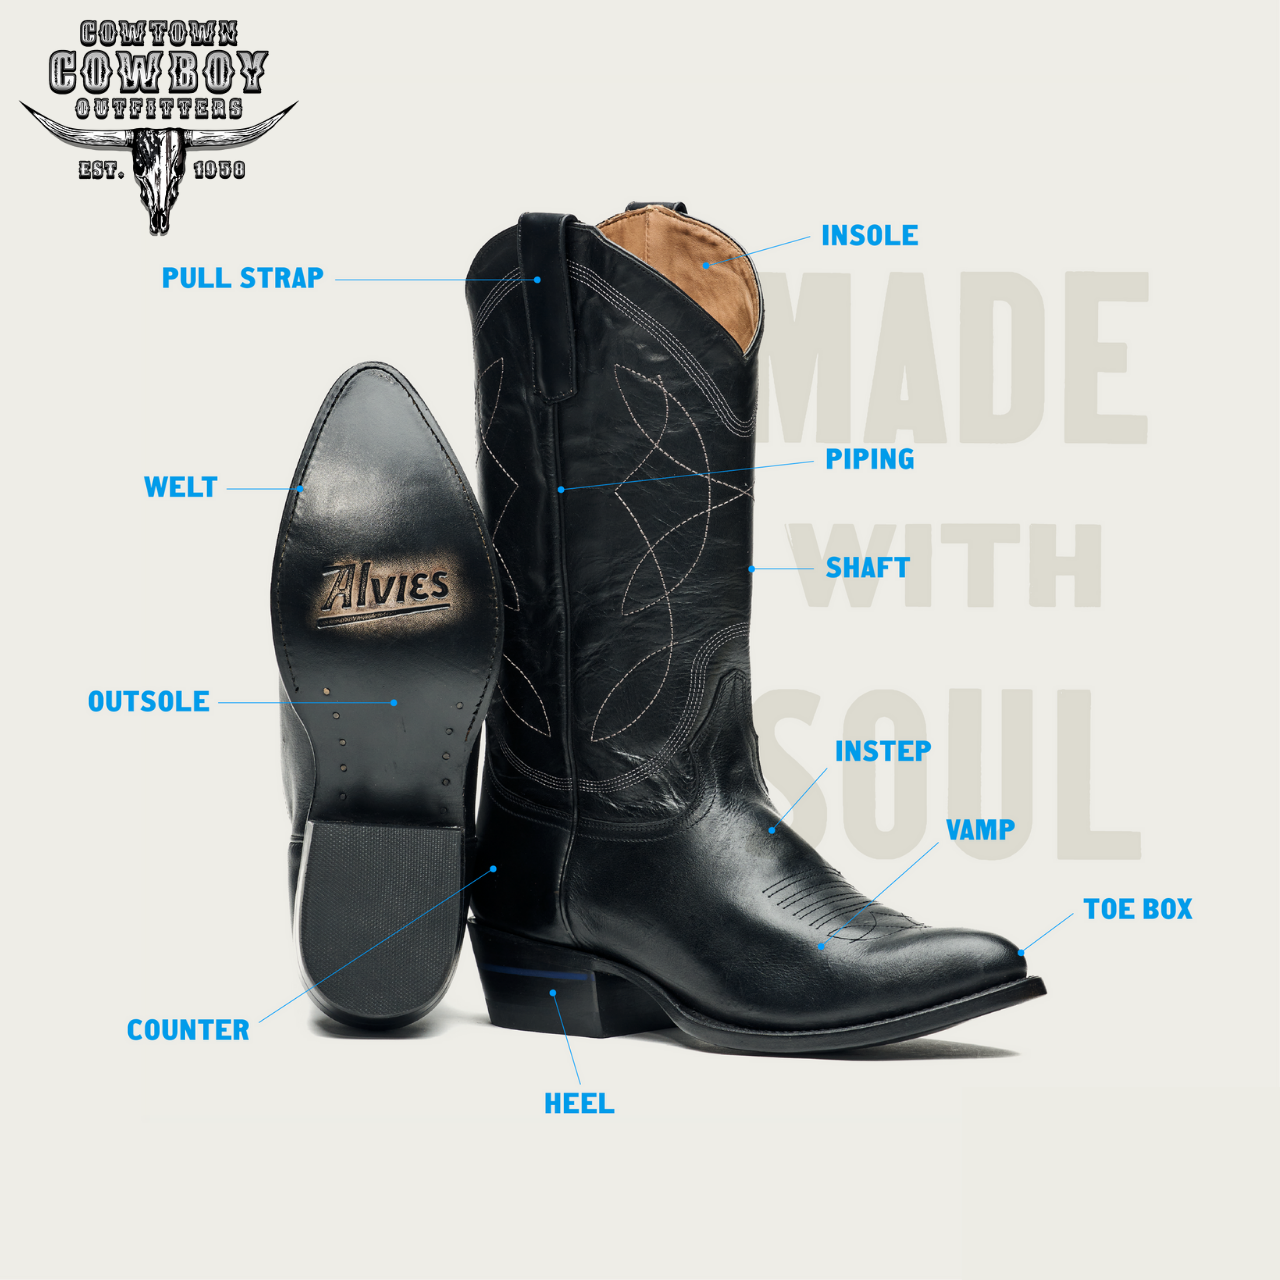 The Anatomy of a Cowboy Boot | Cowtown Cowboy Outfitters - Cowtown ...